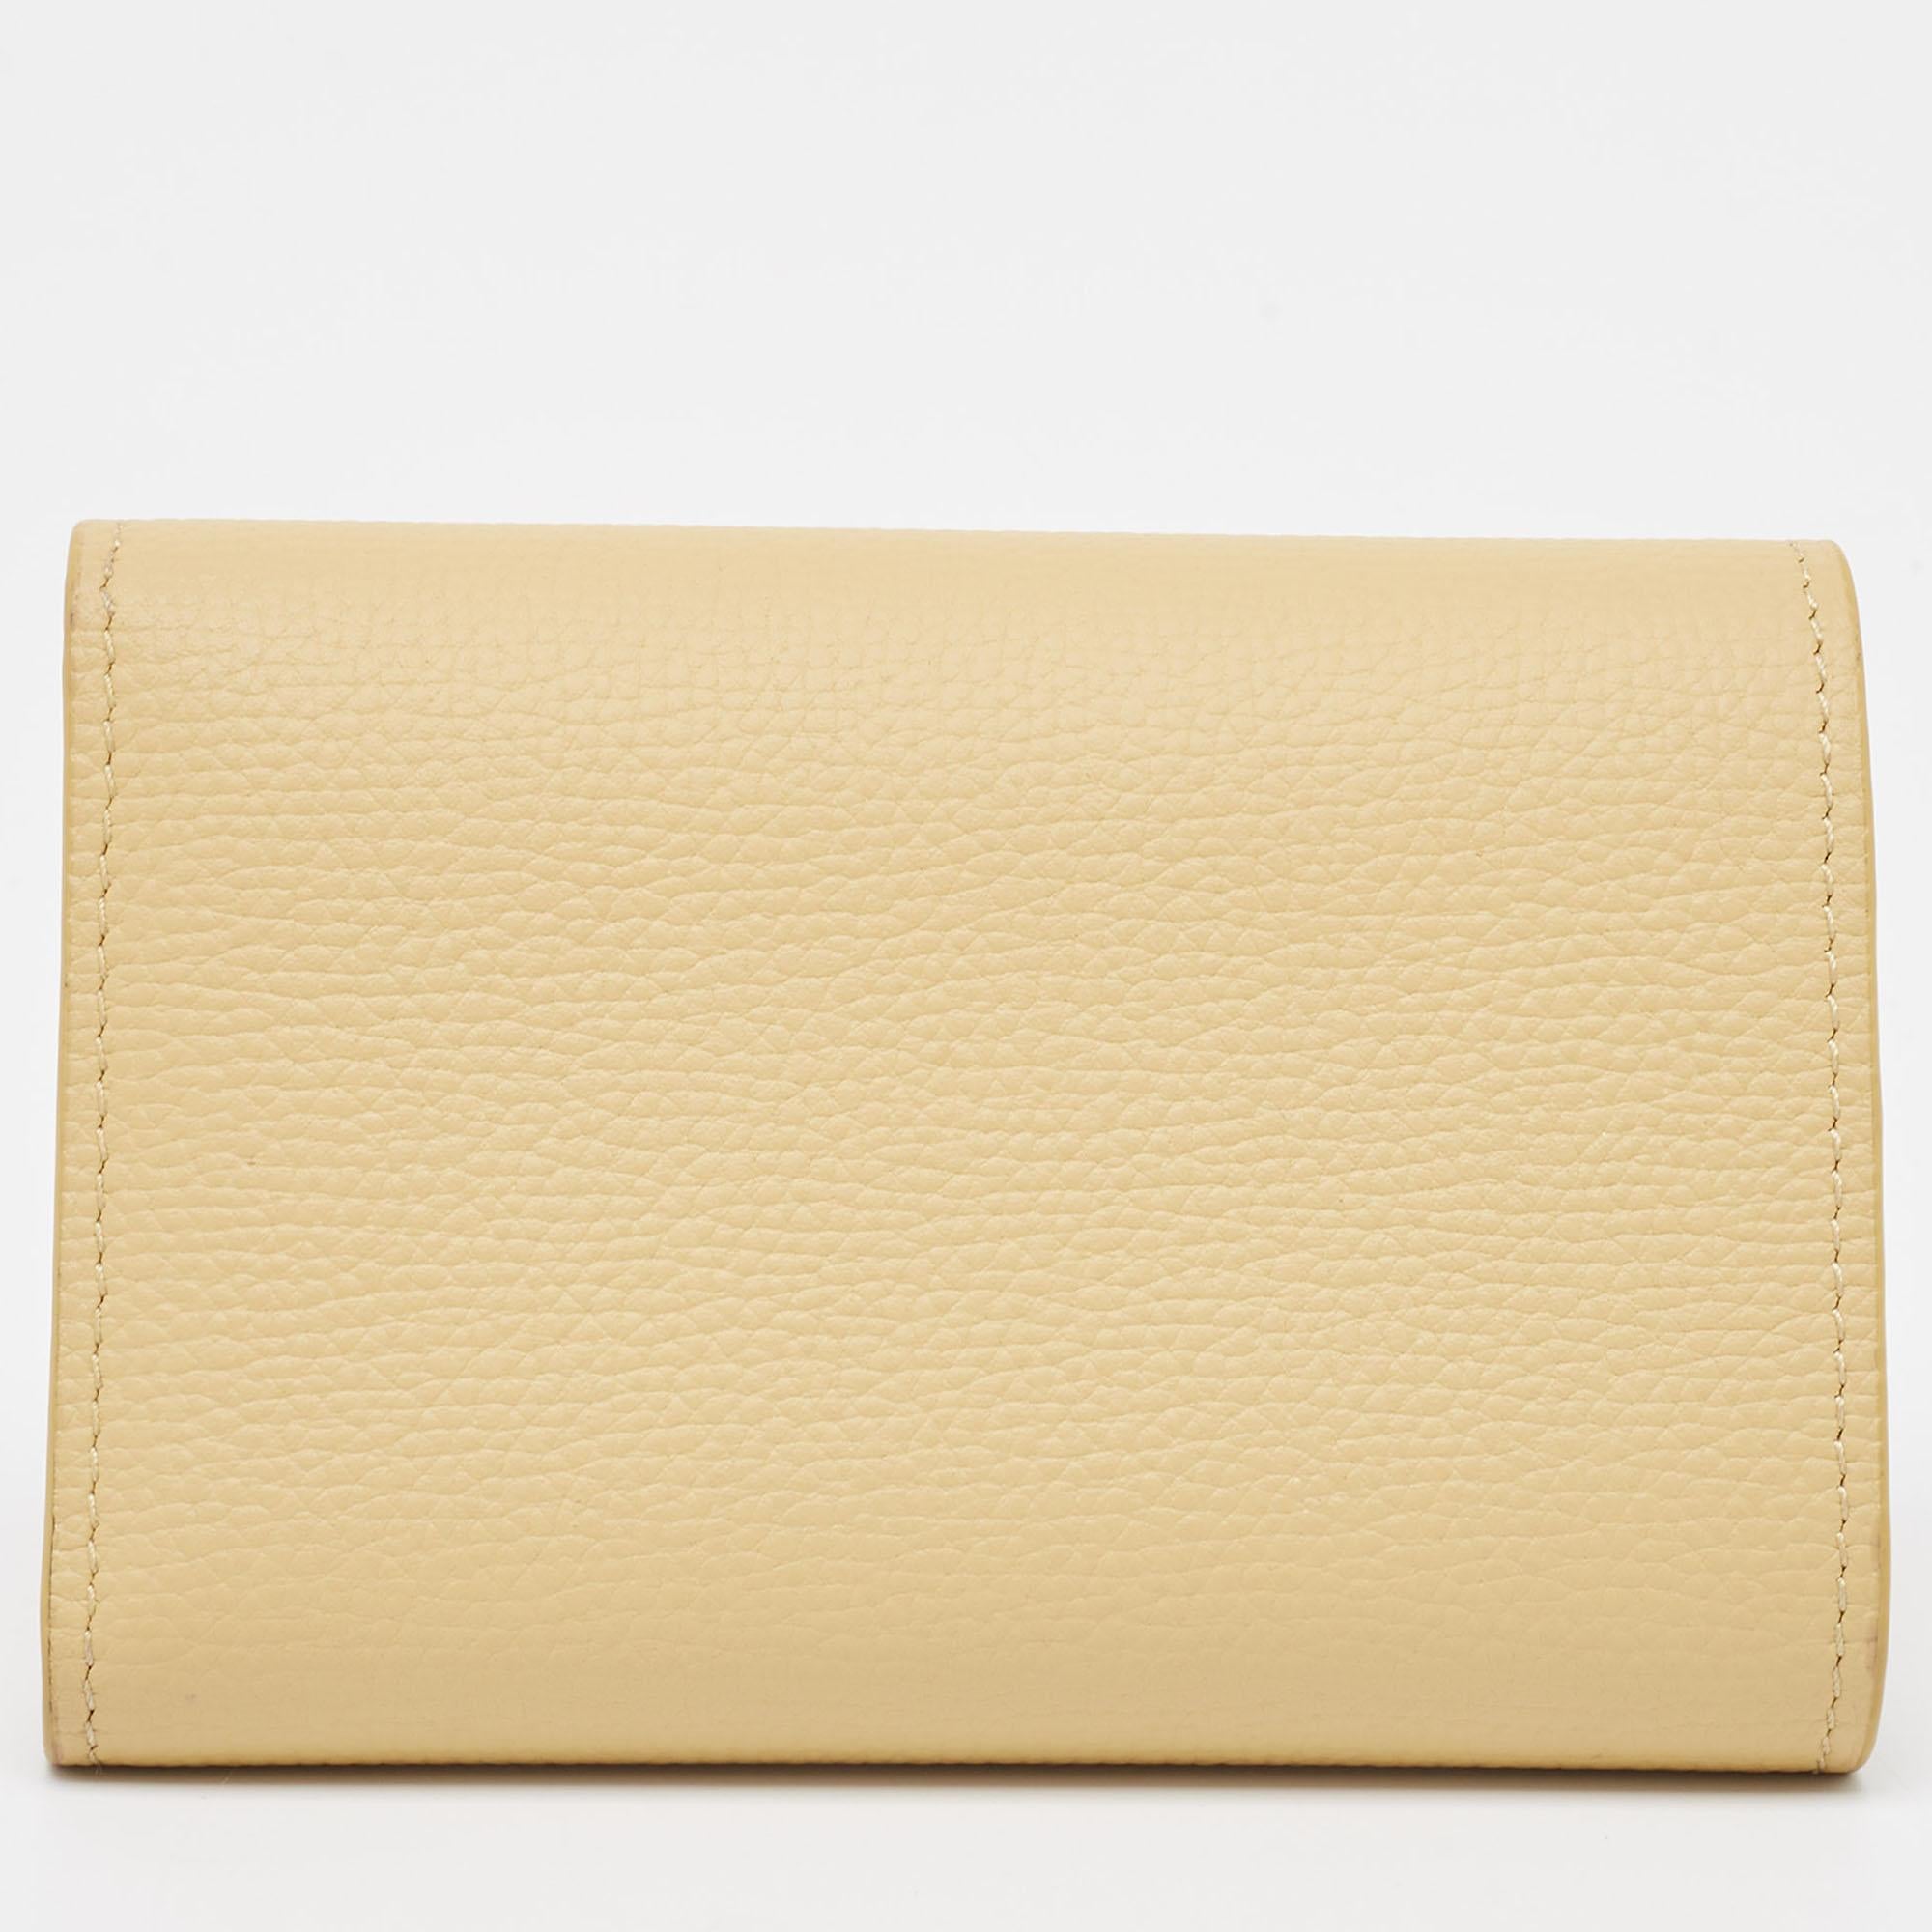 Loewe Yellow Leather Anagram Trifold Wallet In Excellent Condition For Sale In Dubai, Al Qouz 2